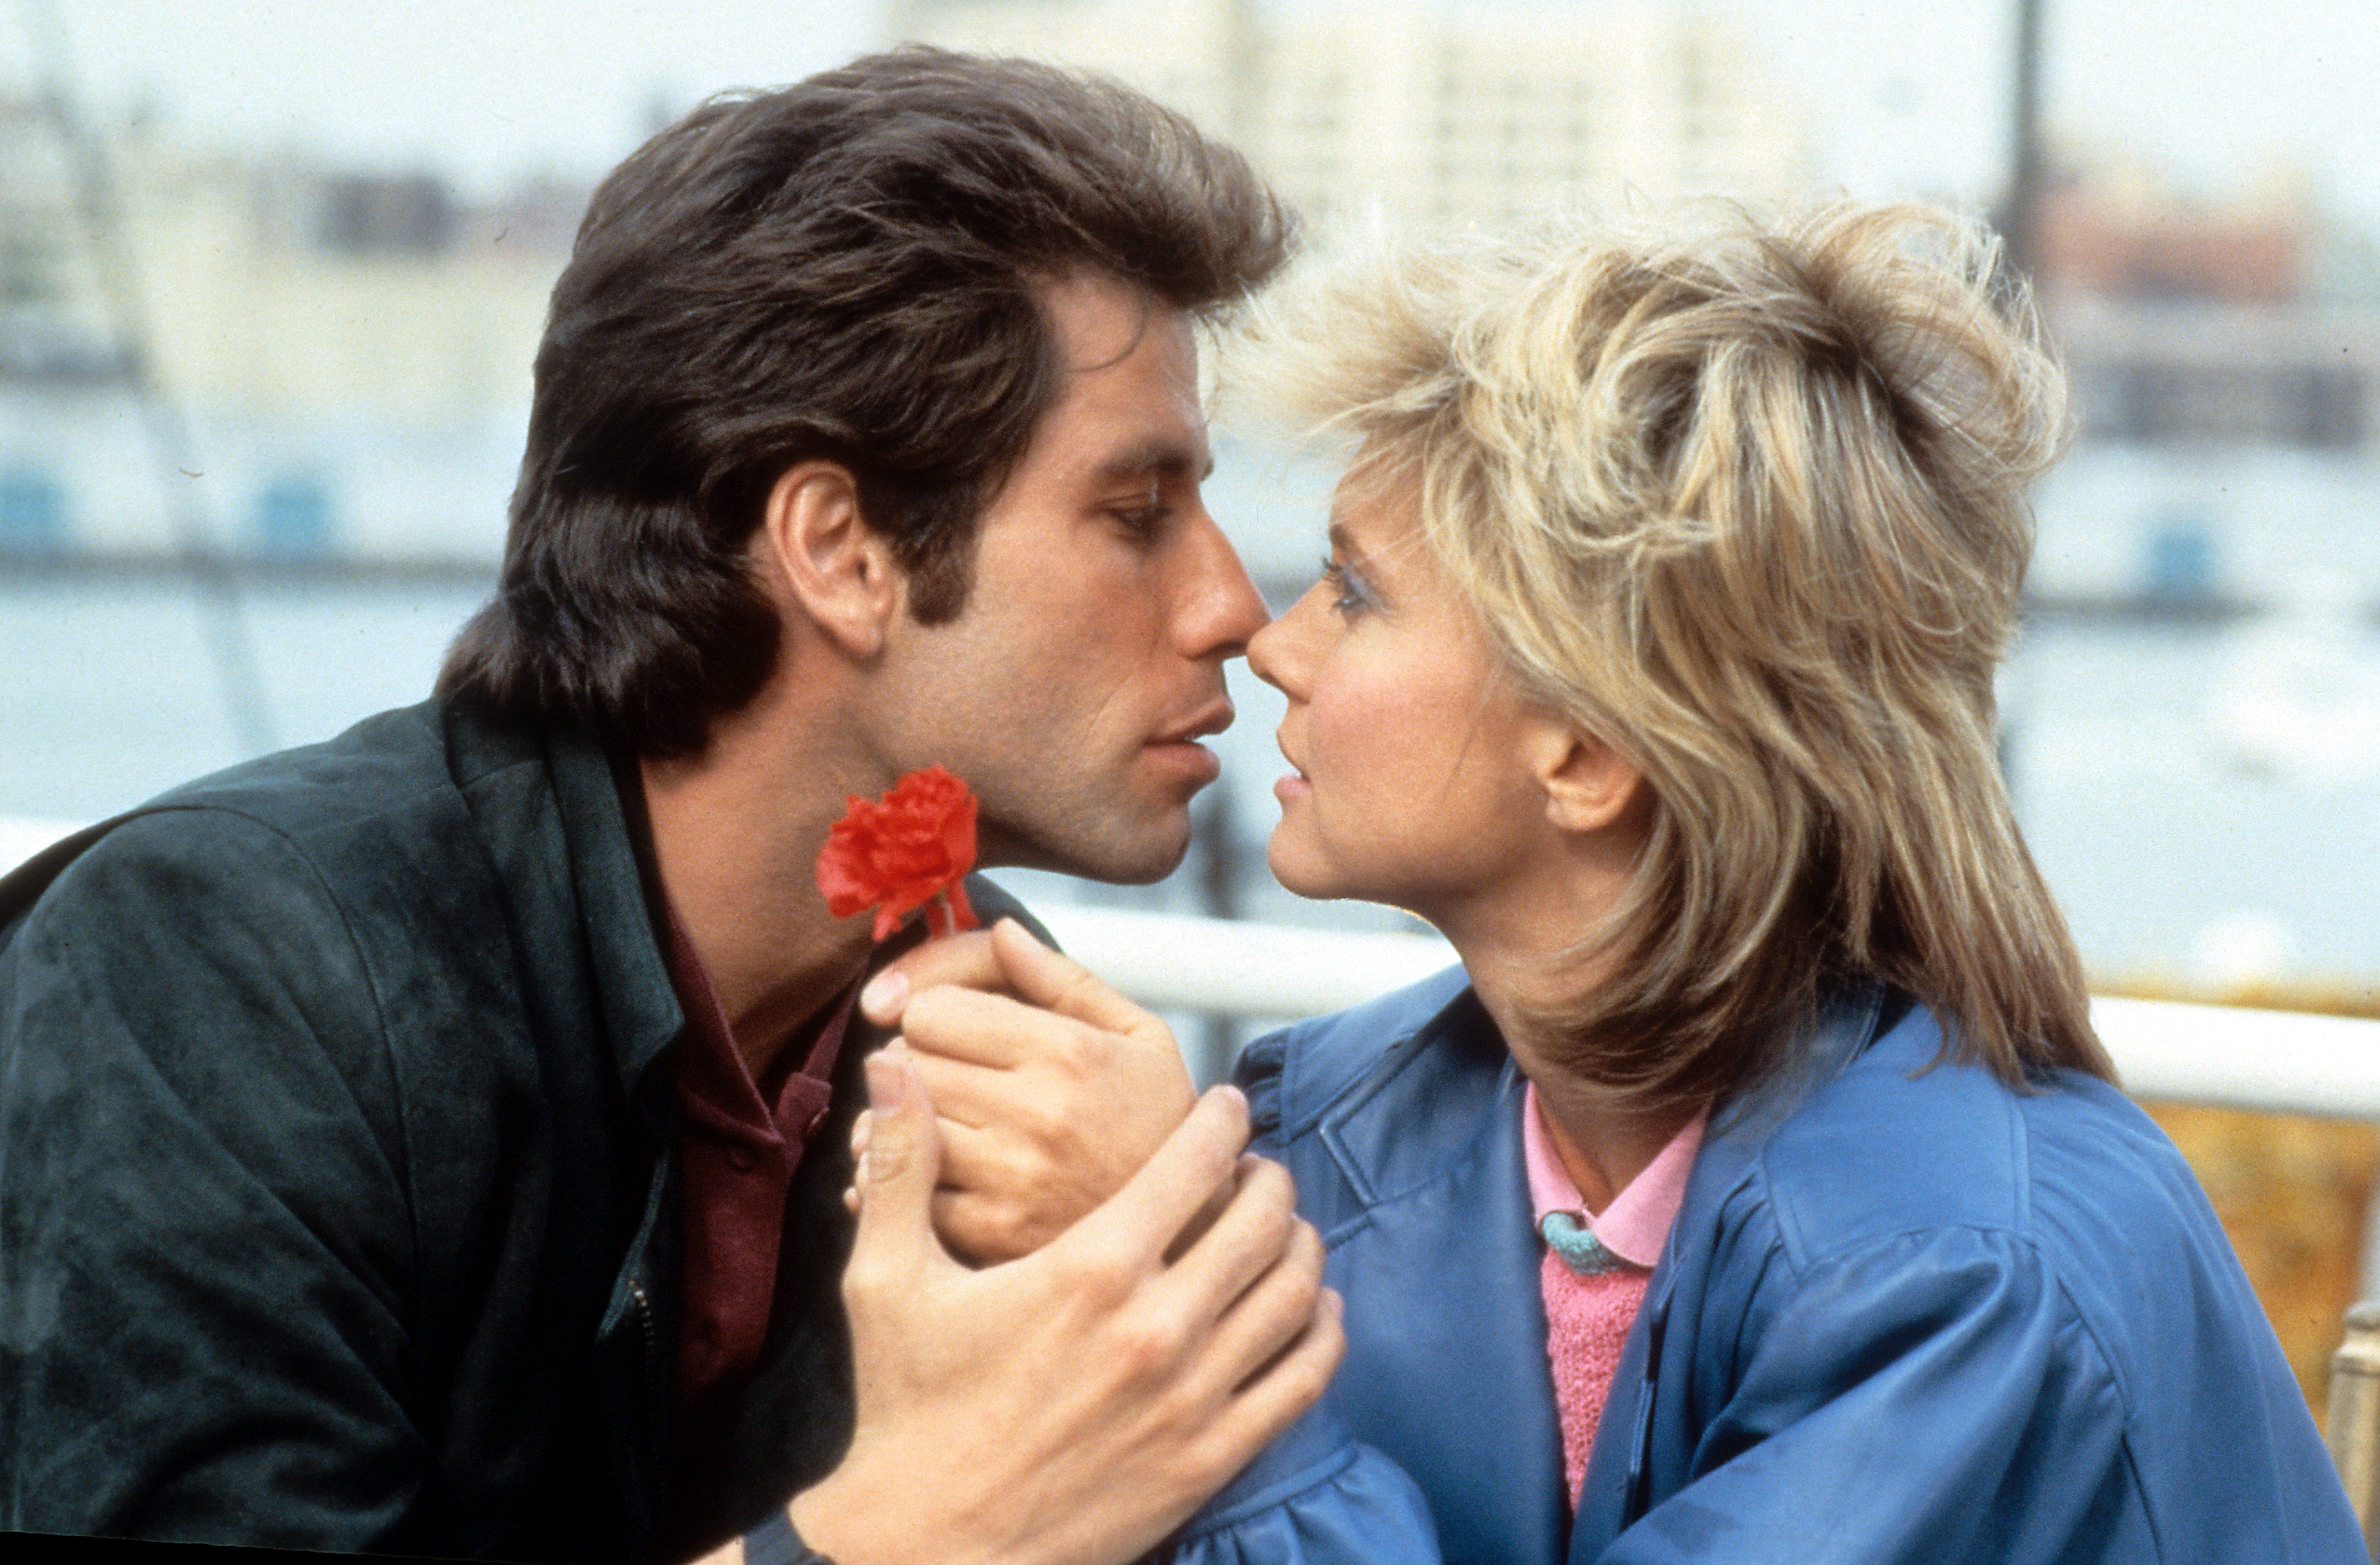 John Travolta kissing Olivia Newton-John in a scene from the 1983 film "Two Of A Kind." / Source: Getty Images